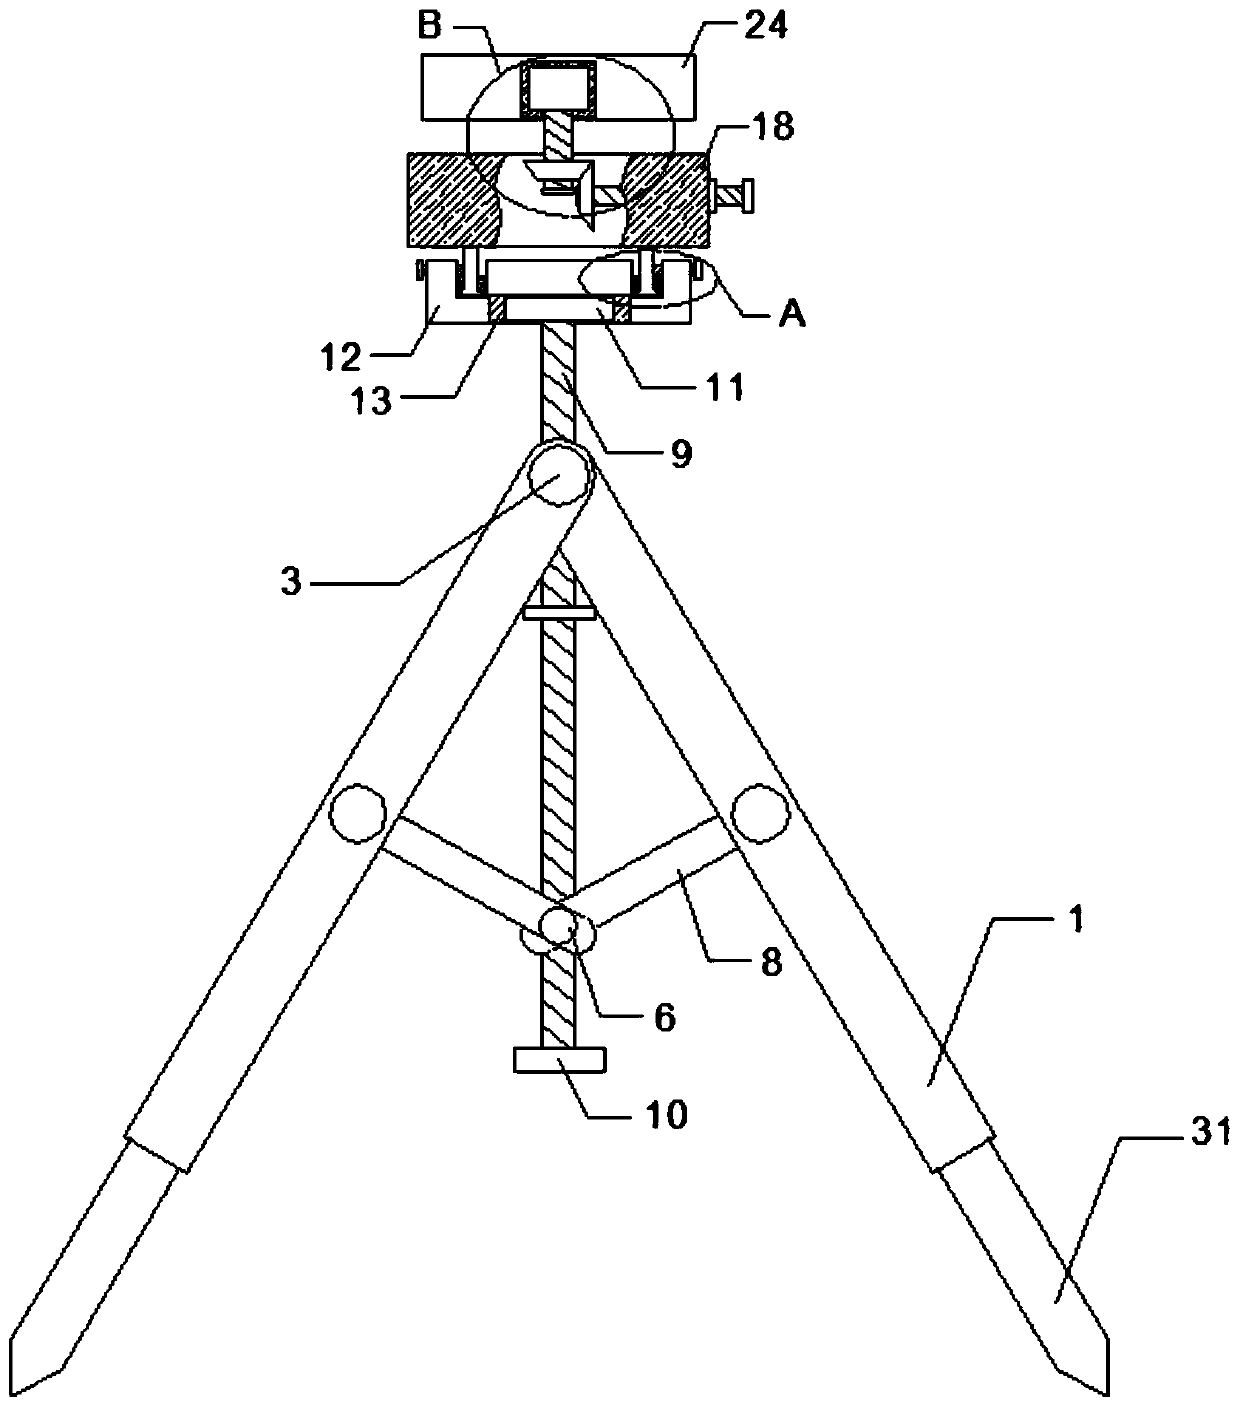 A stable and precisely regulated auxiliary device for surveying and mapping instruments